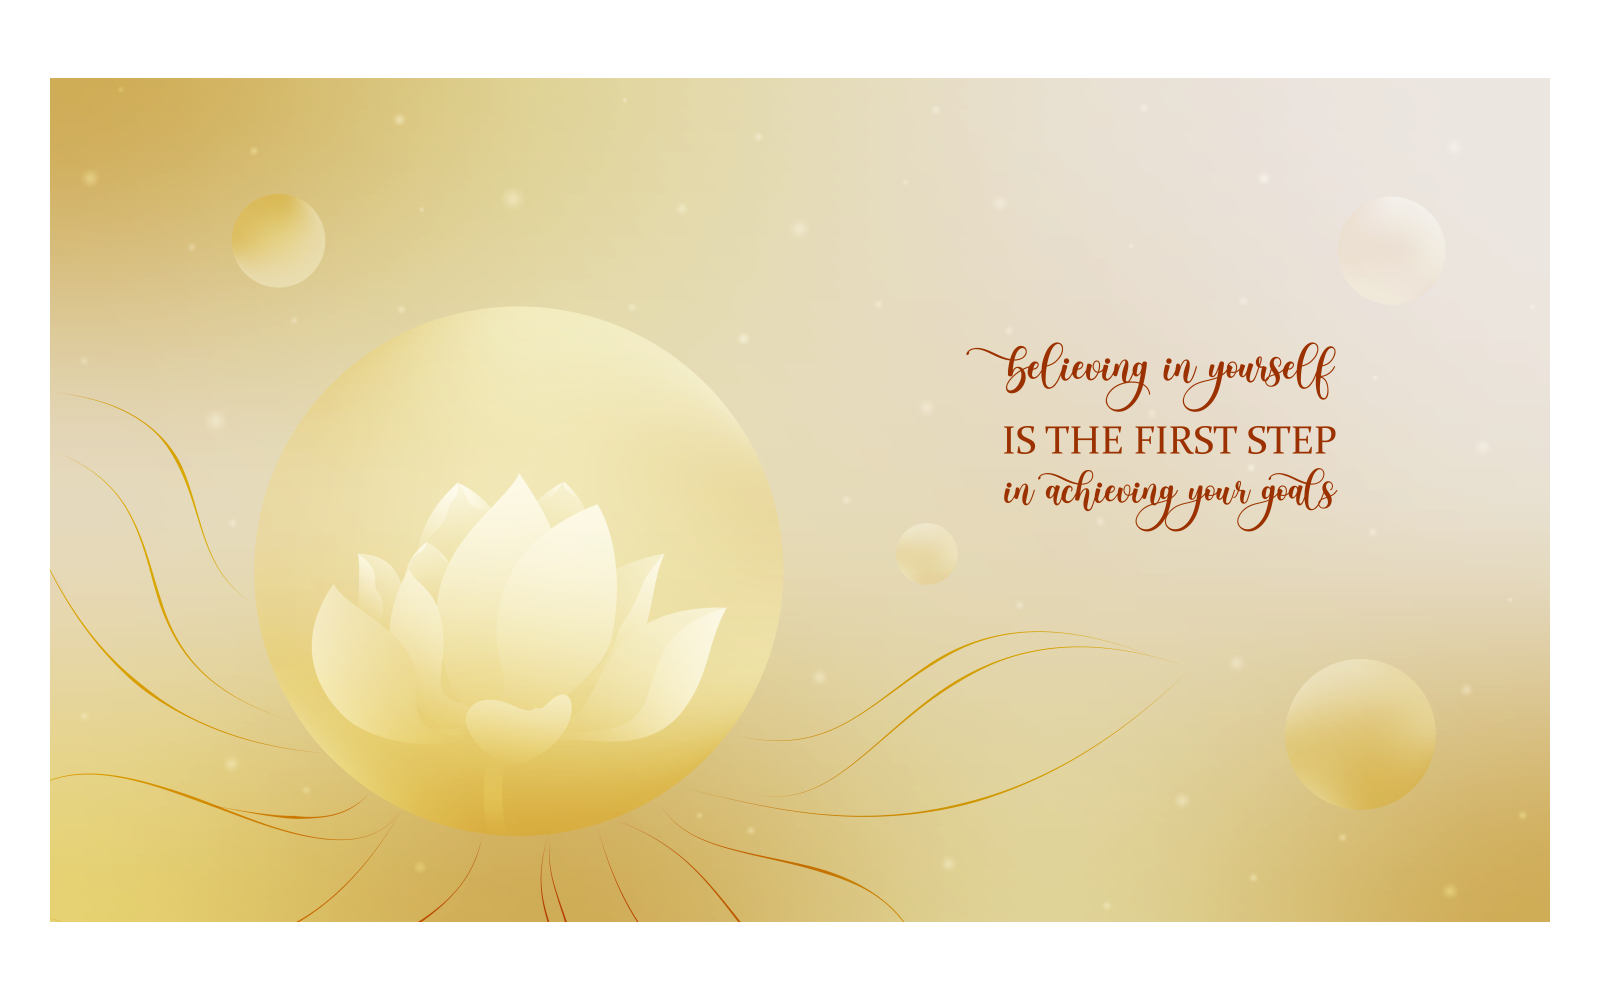 Inspirational Backgrounds 14400x8100px In Yellow Color With Lotus And Quote About Self-belief